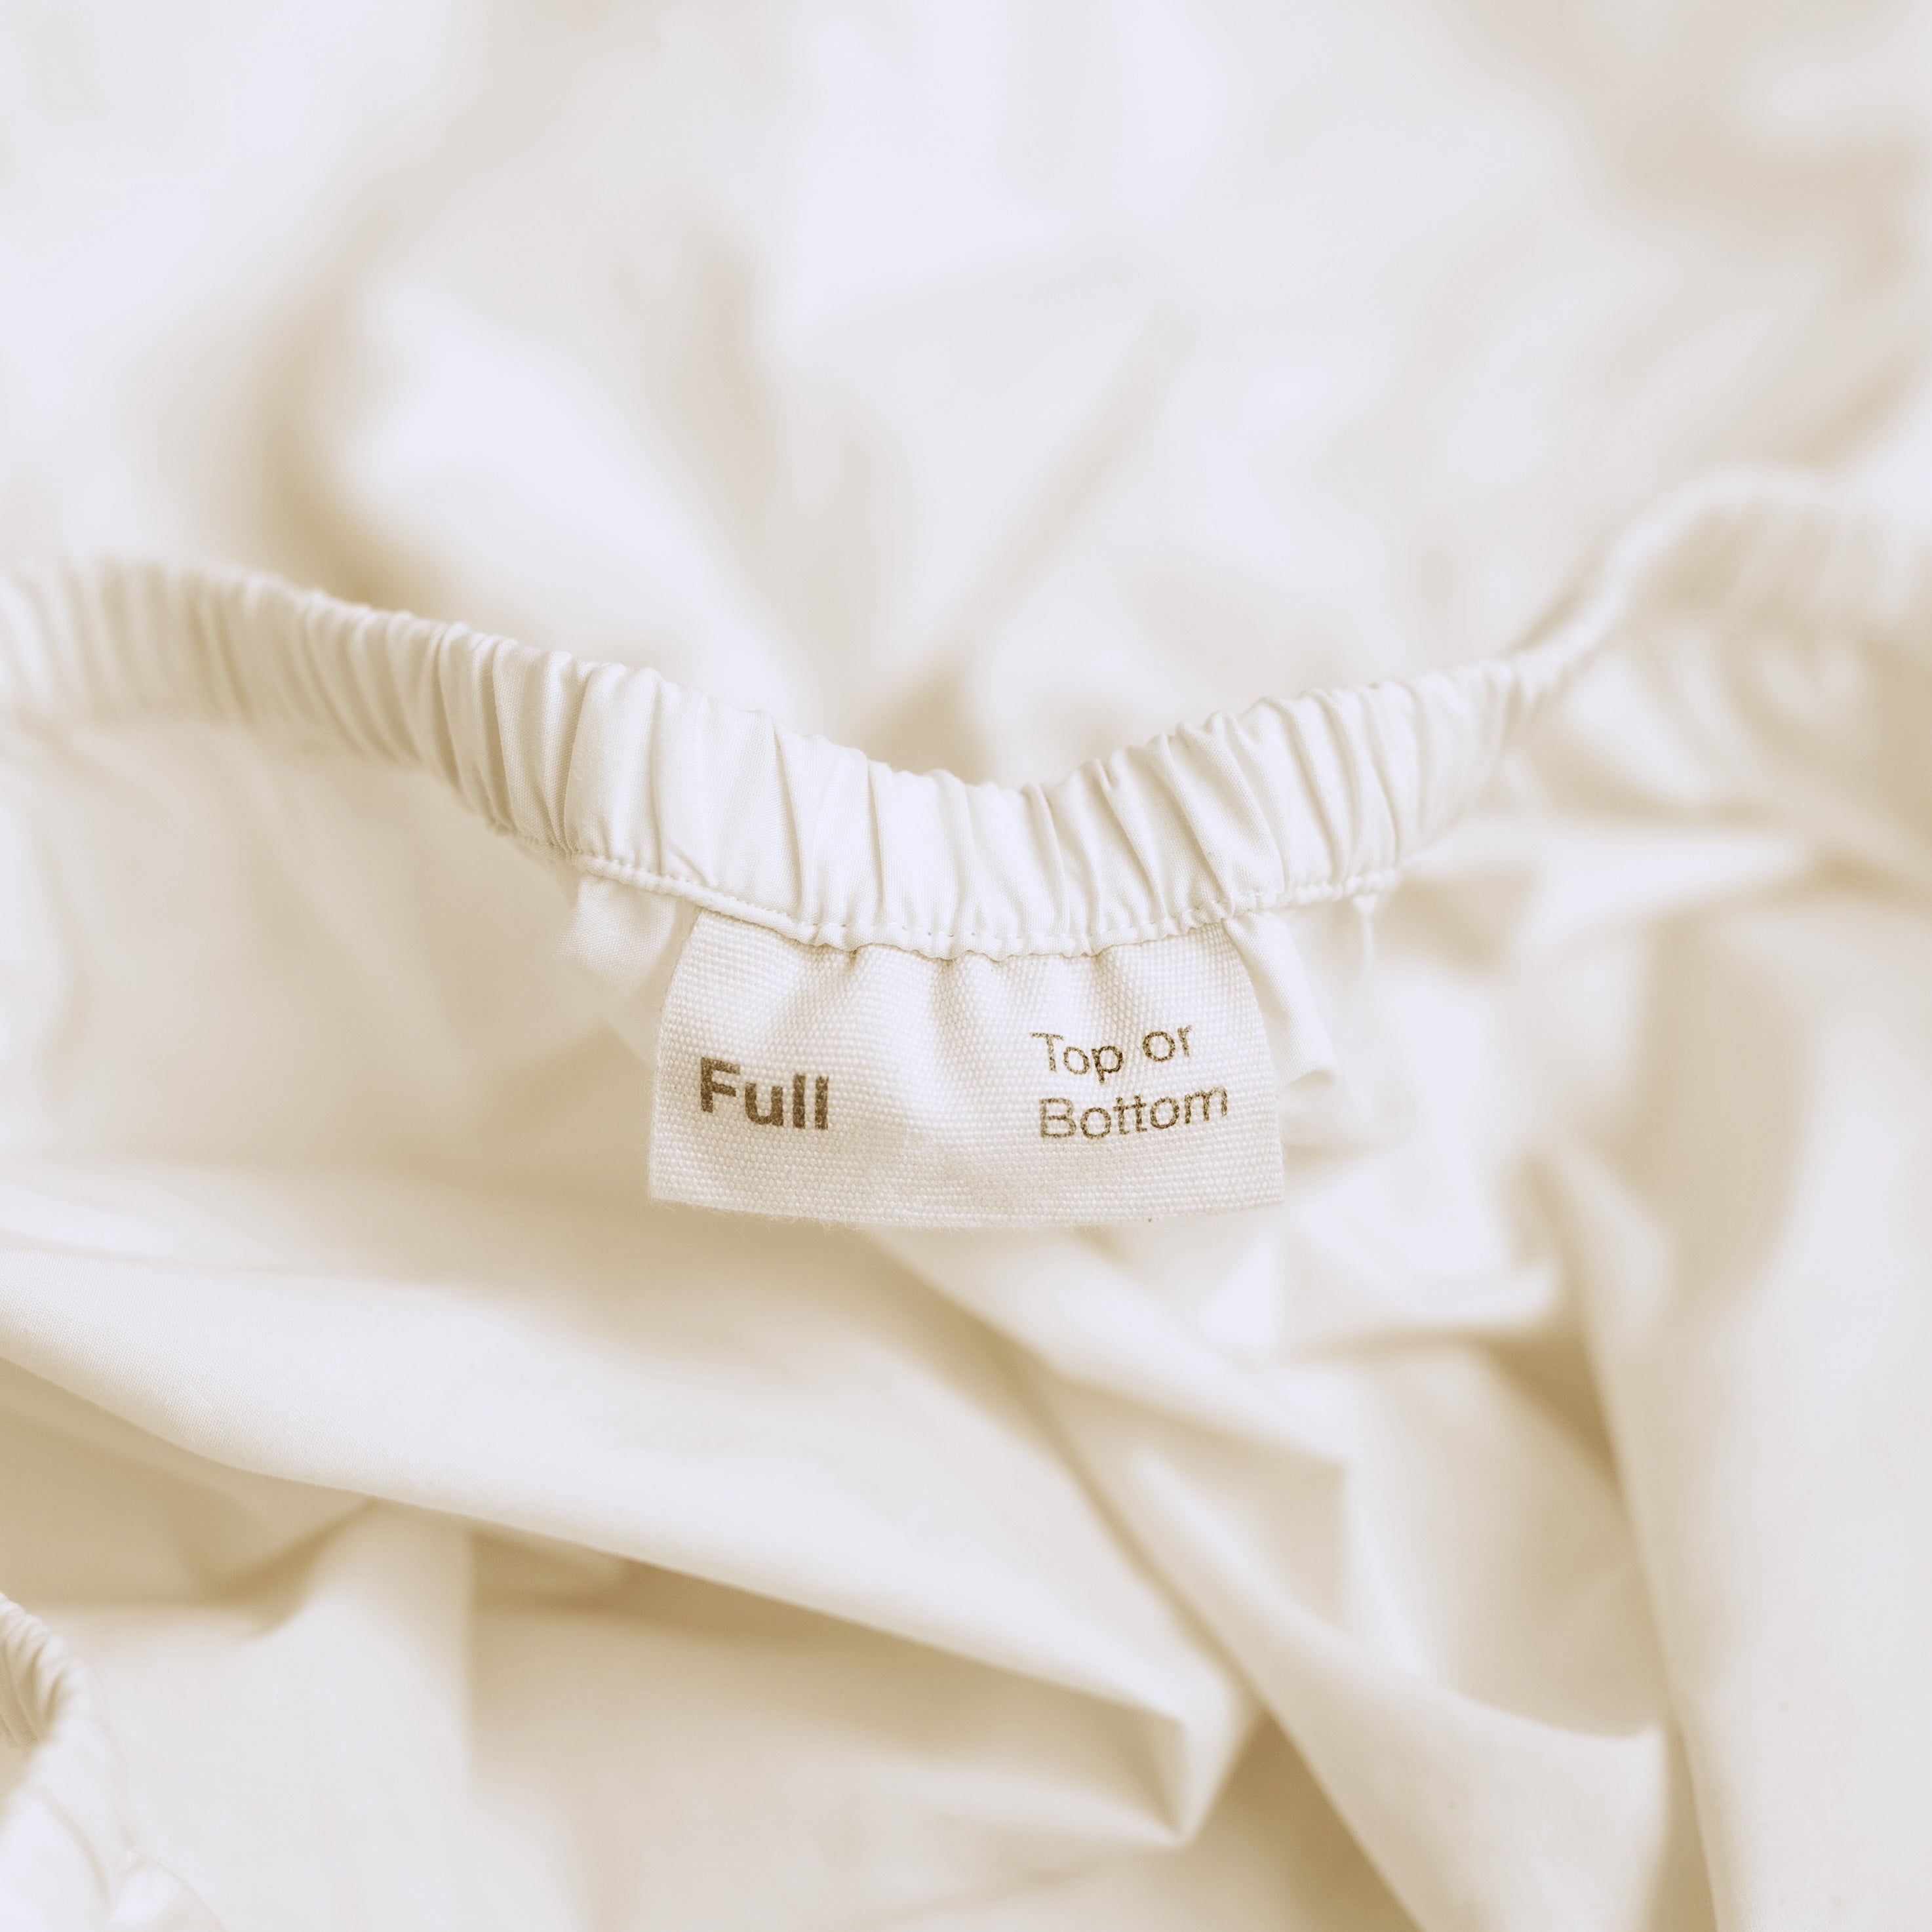 A detail view of the orientation label on an Oolie fitted sheet, indicating "Full" size and marking the "Top or Bottom" of the sheet.